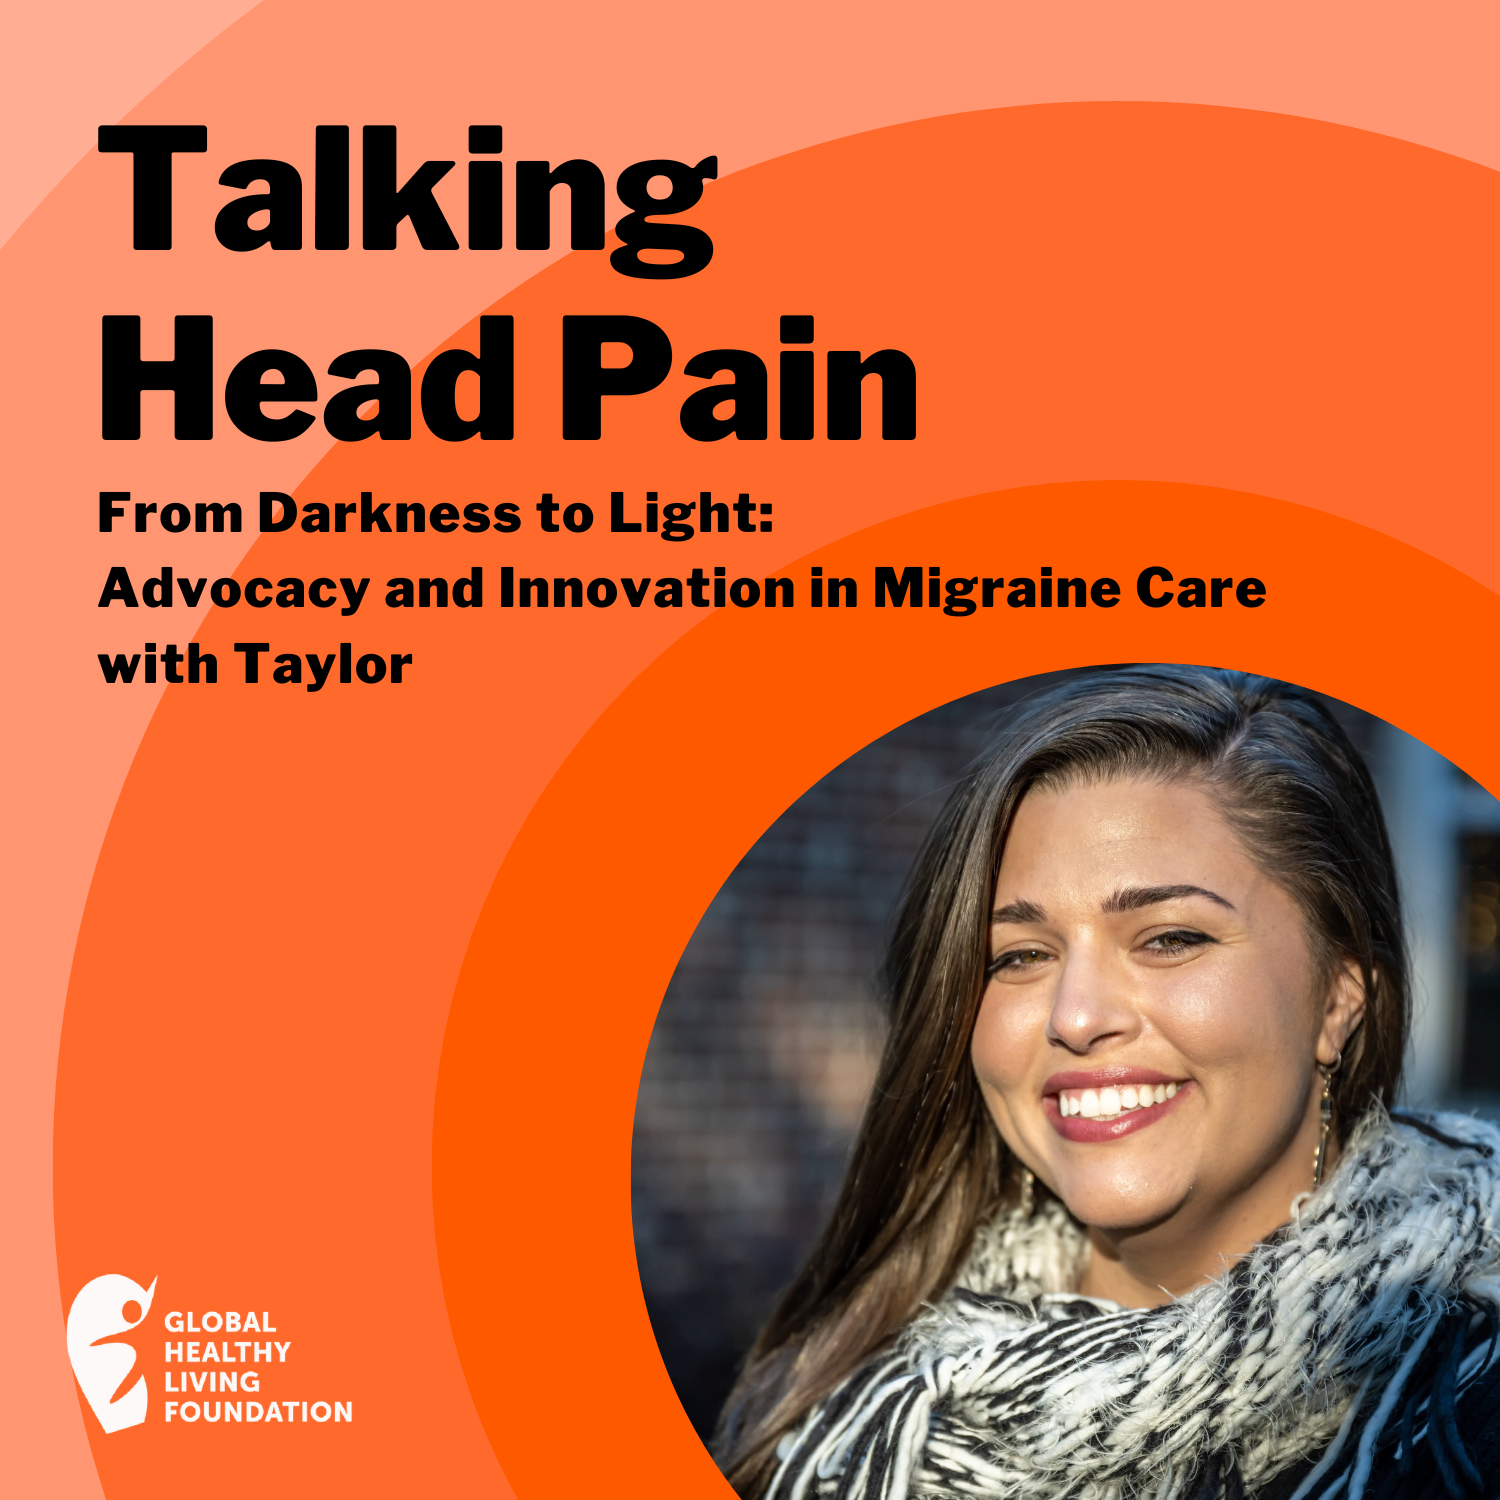 From Darkness to Light: Advocacy and Innovation in Migraine Care with Taylor